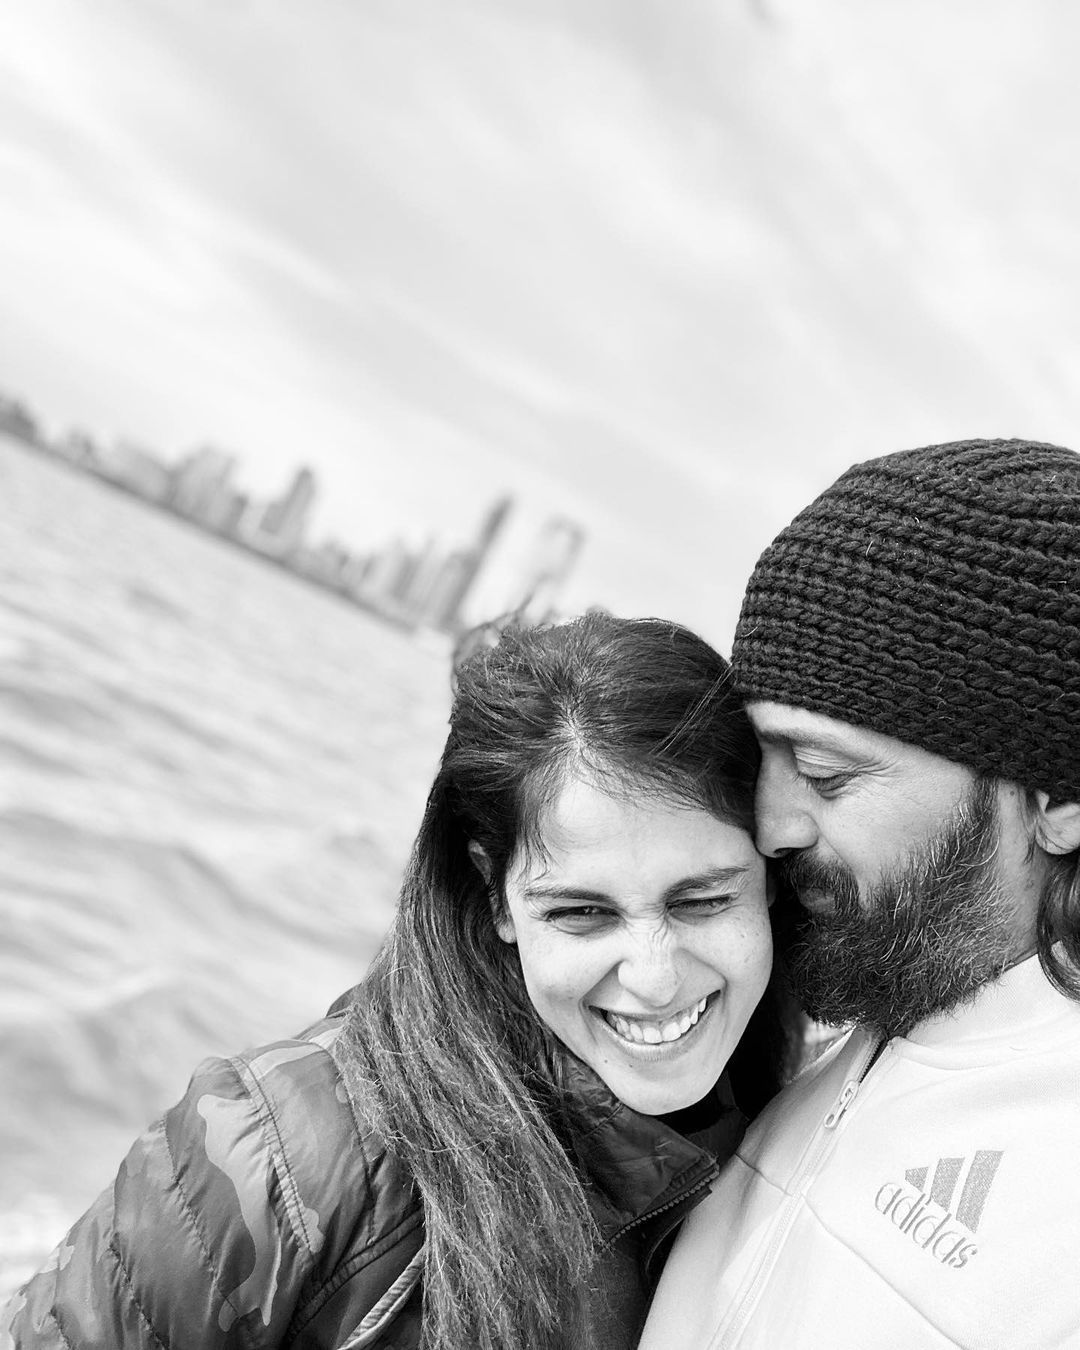 Riteish Deshmukh has a lovey,dovey birthday message for his ‘baiko’